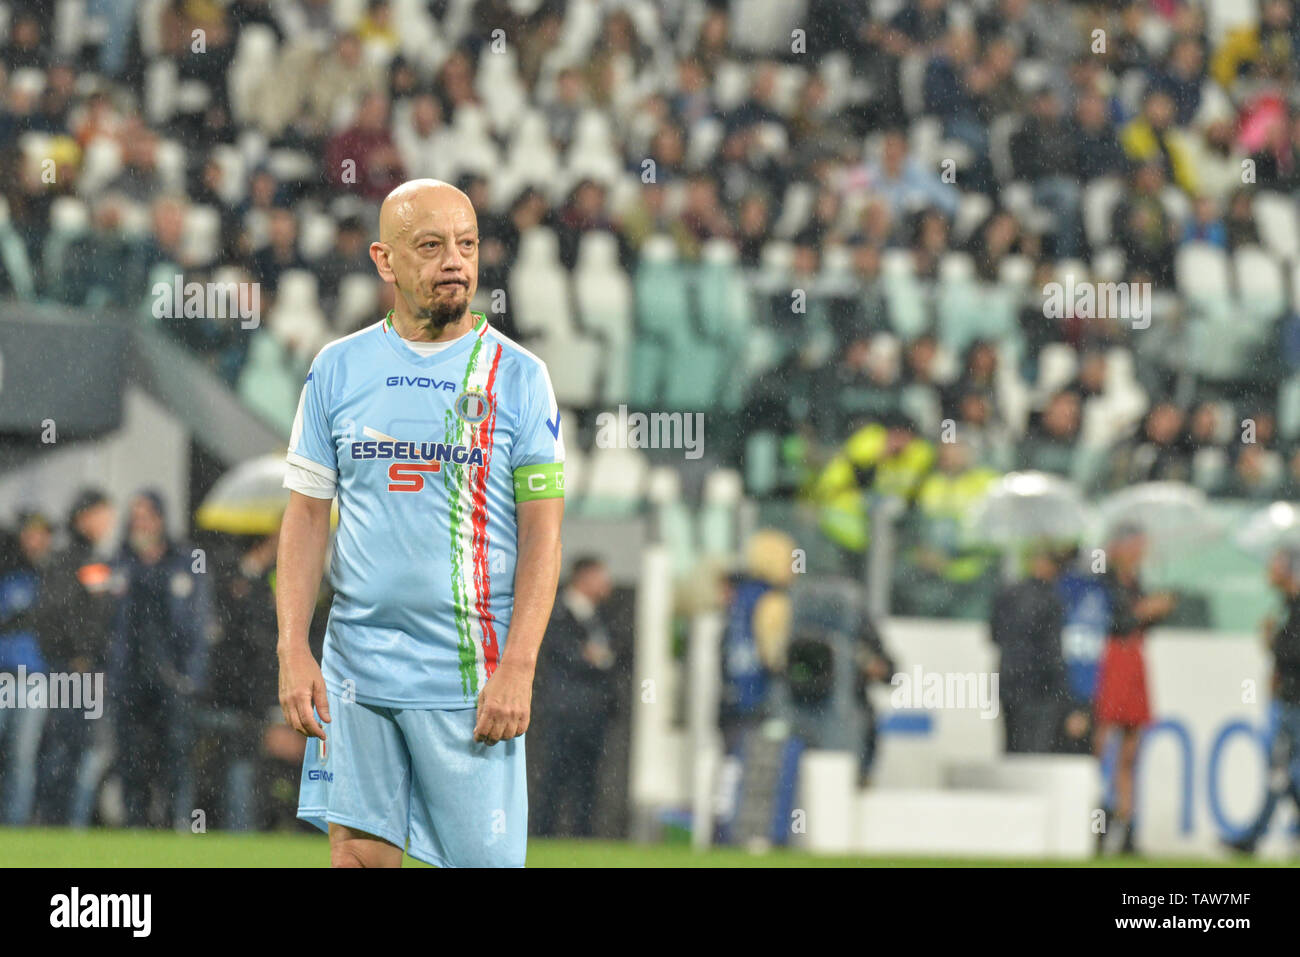 Turin, Italy. 28th May, 2019. Enrico Ruggeri seen during the 'Partita Del Cuore' Charity Match at Allianz Stadium. Campioni Per La Ricerca win the 'Champions for Research' 3-2 against the 'Italian National Singers'. Credit: SOPA Images Limited/Alamy Live News Stock Photo